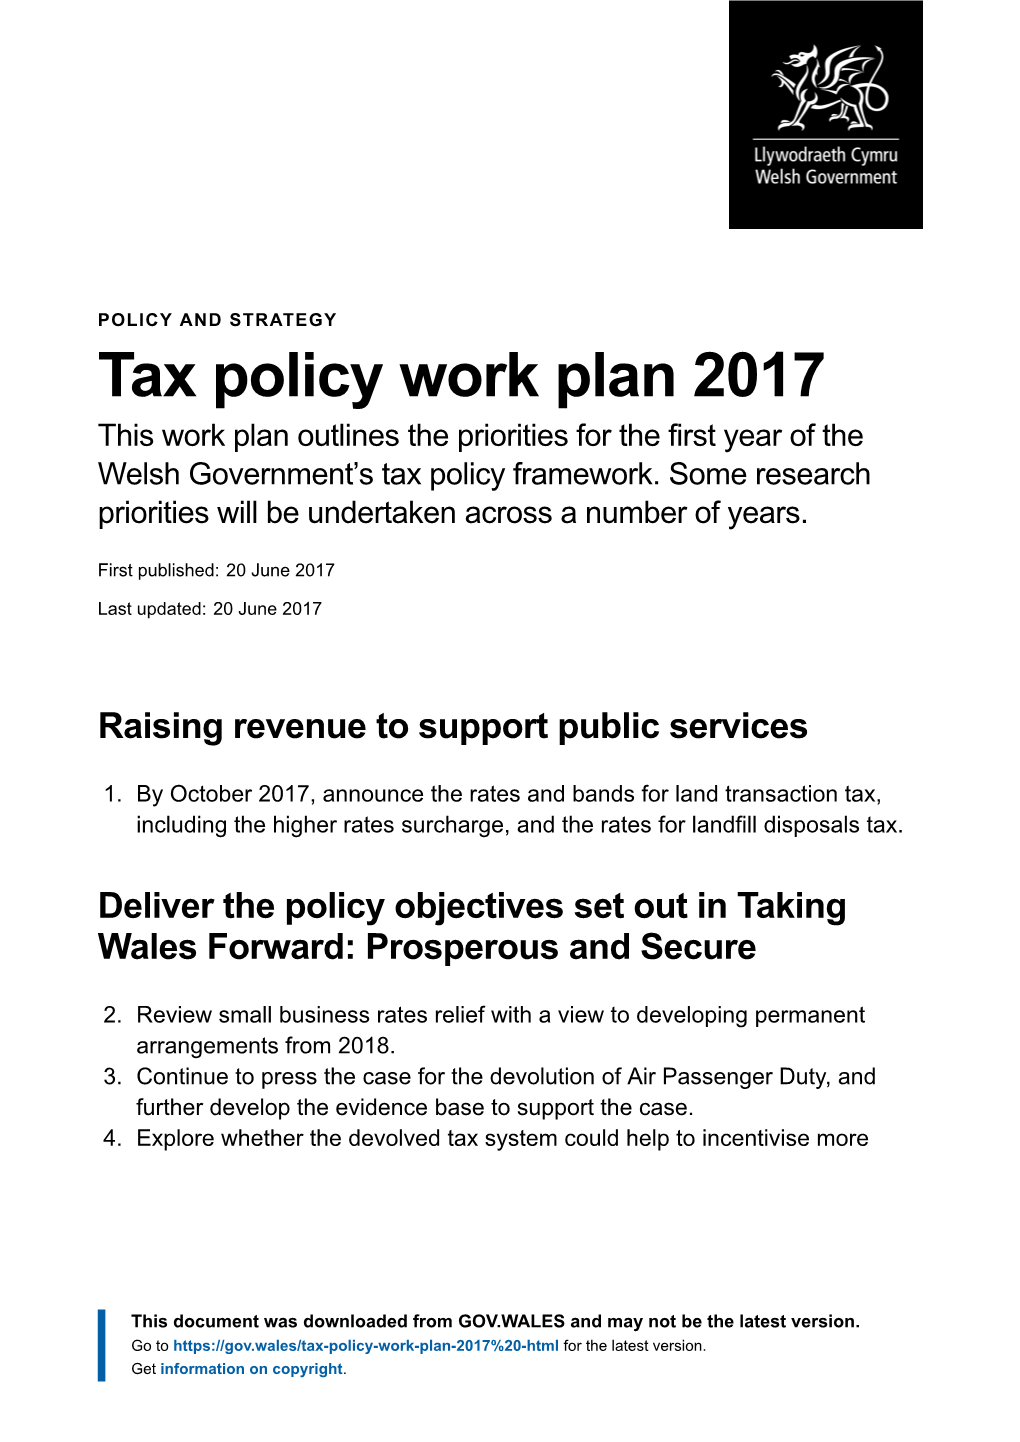 Tax Policy Work Plan 2017 | GOV.WALES